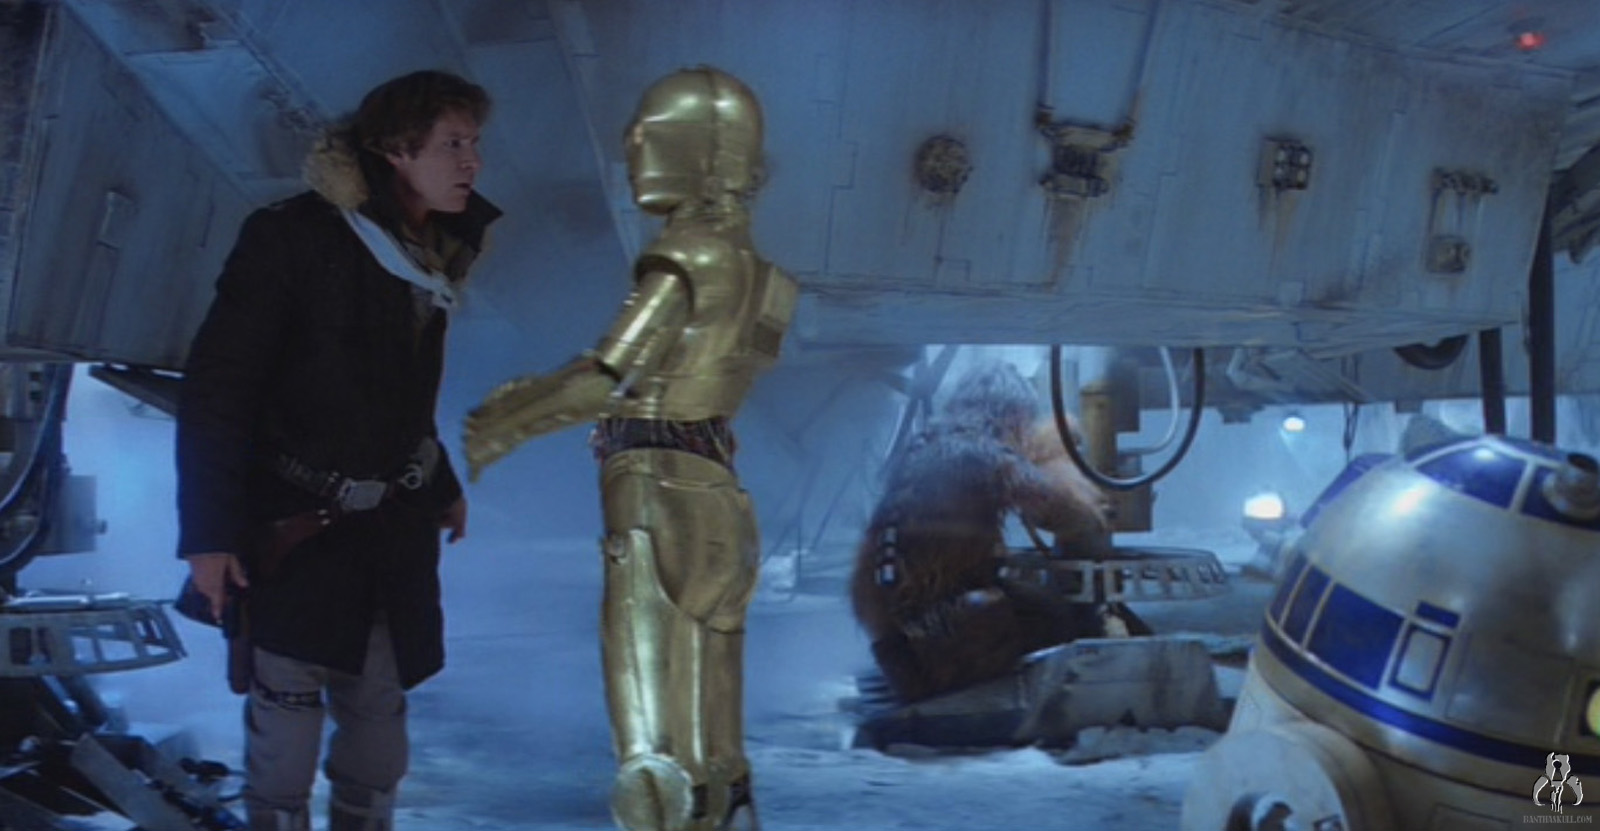 What was the odds of Luke and Han coming back before the Defense Door closed on Hoth?